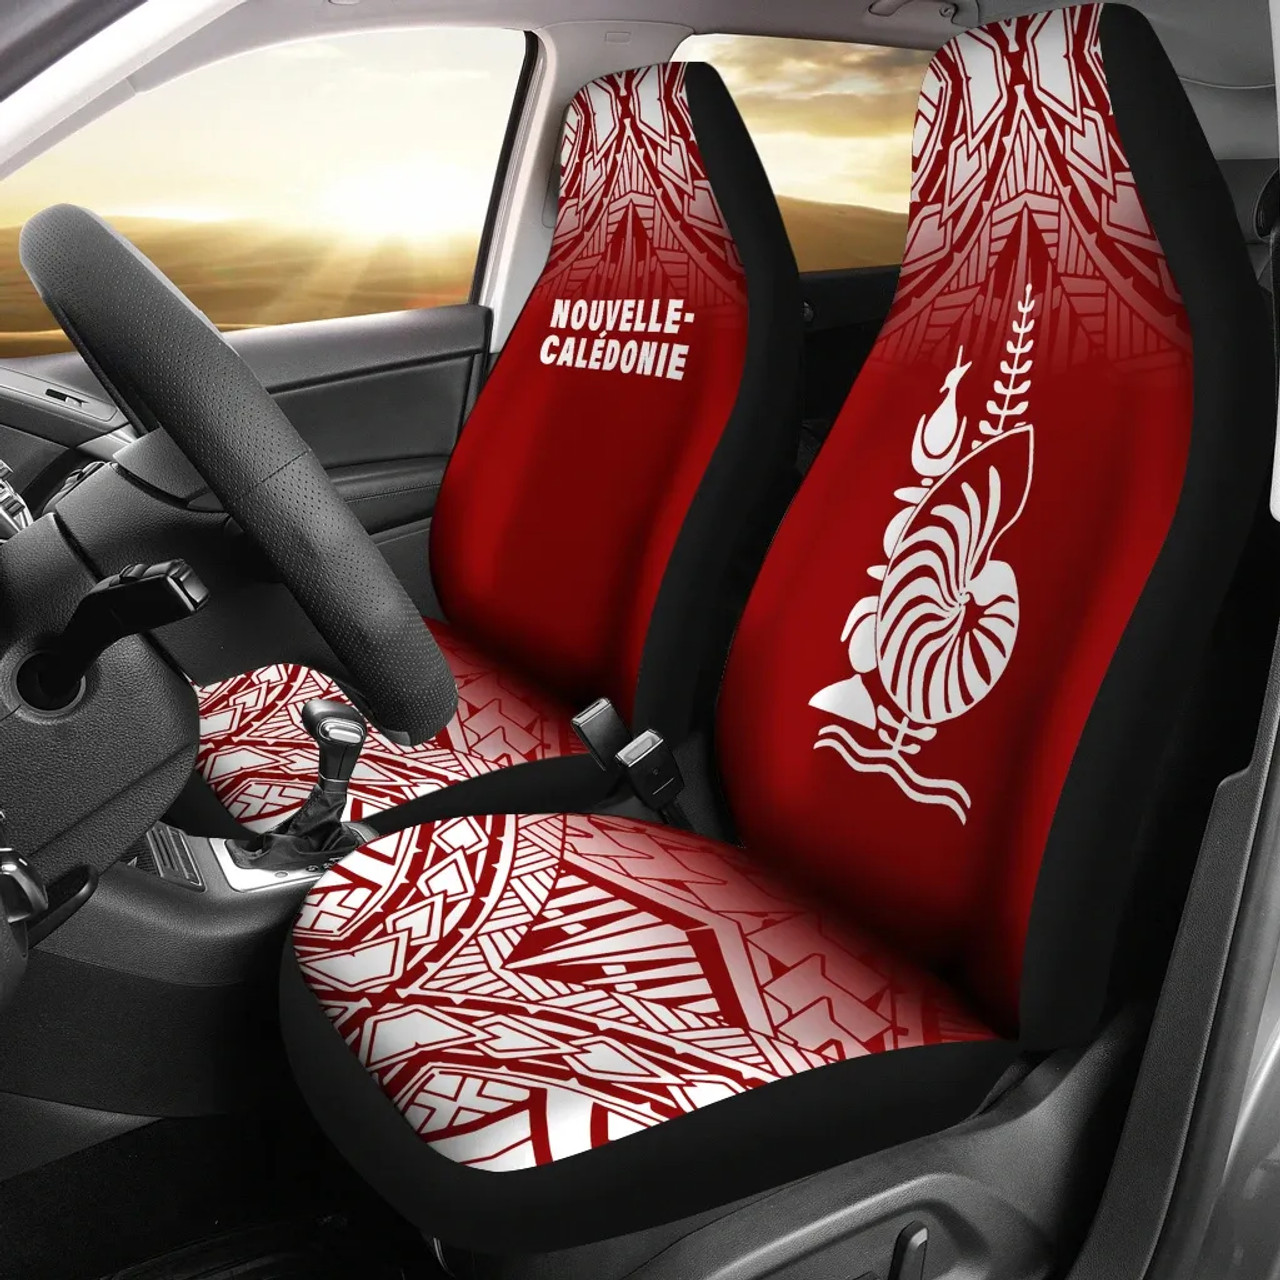 New Caledonia Car Seat Covers - New Caledonia Coat Of Arms Polynesian Tattoo Fog Red